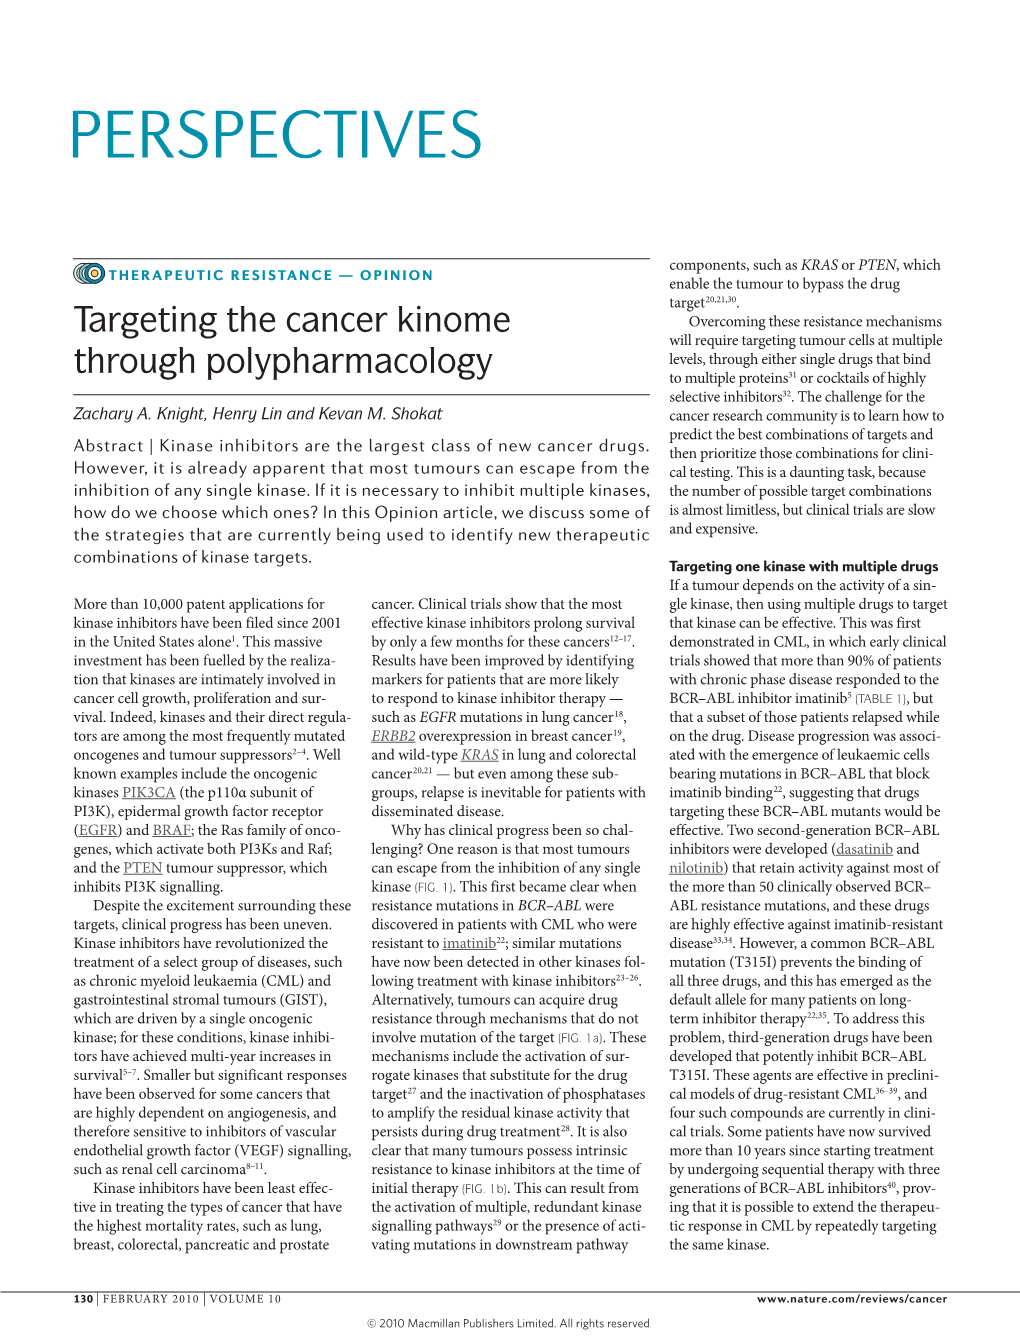 Targeting the Cancer Kinome Through Polypharmacology